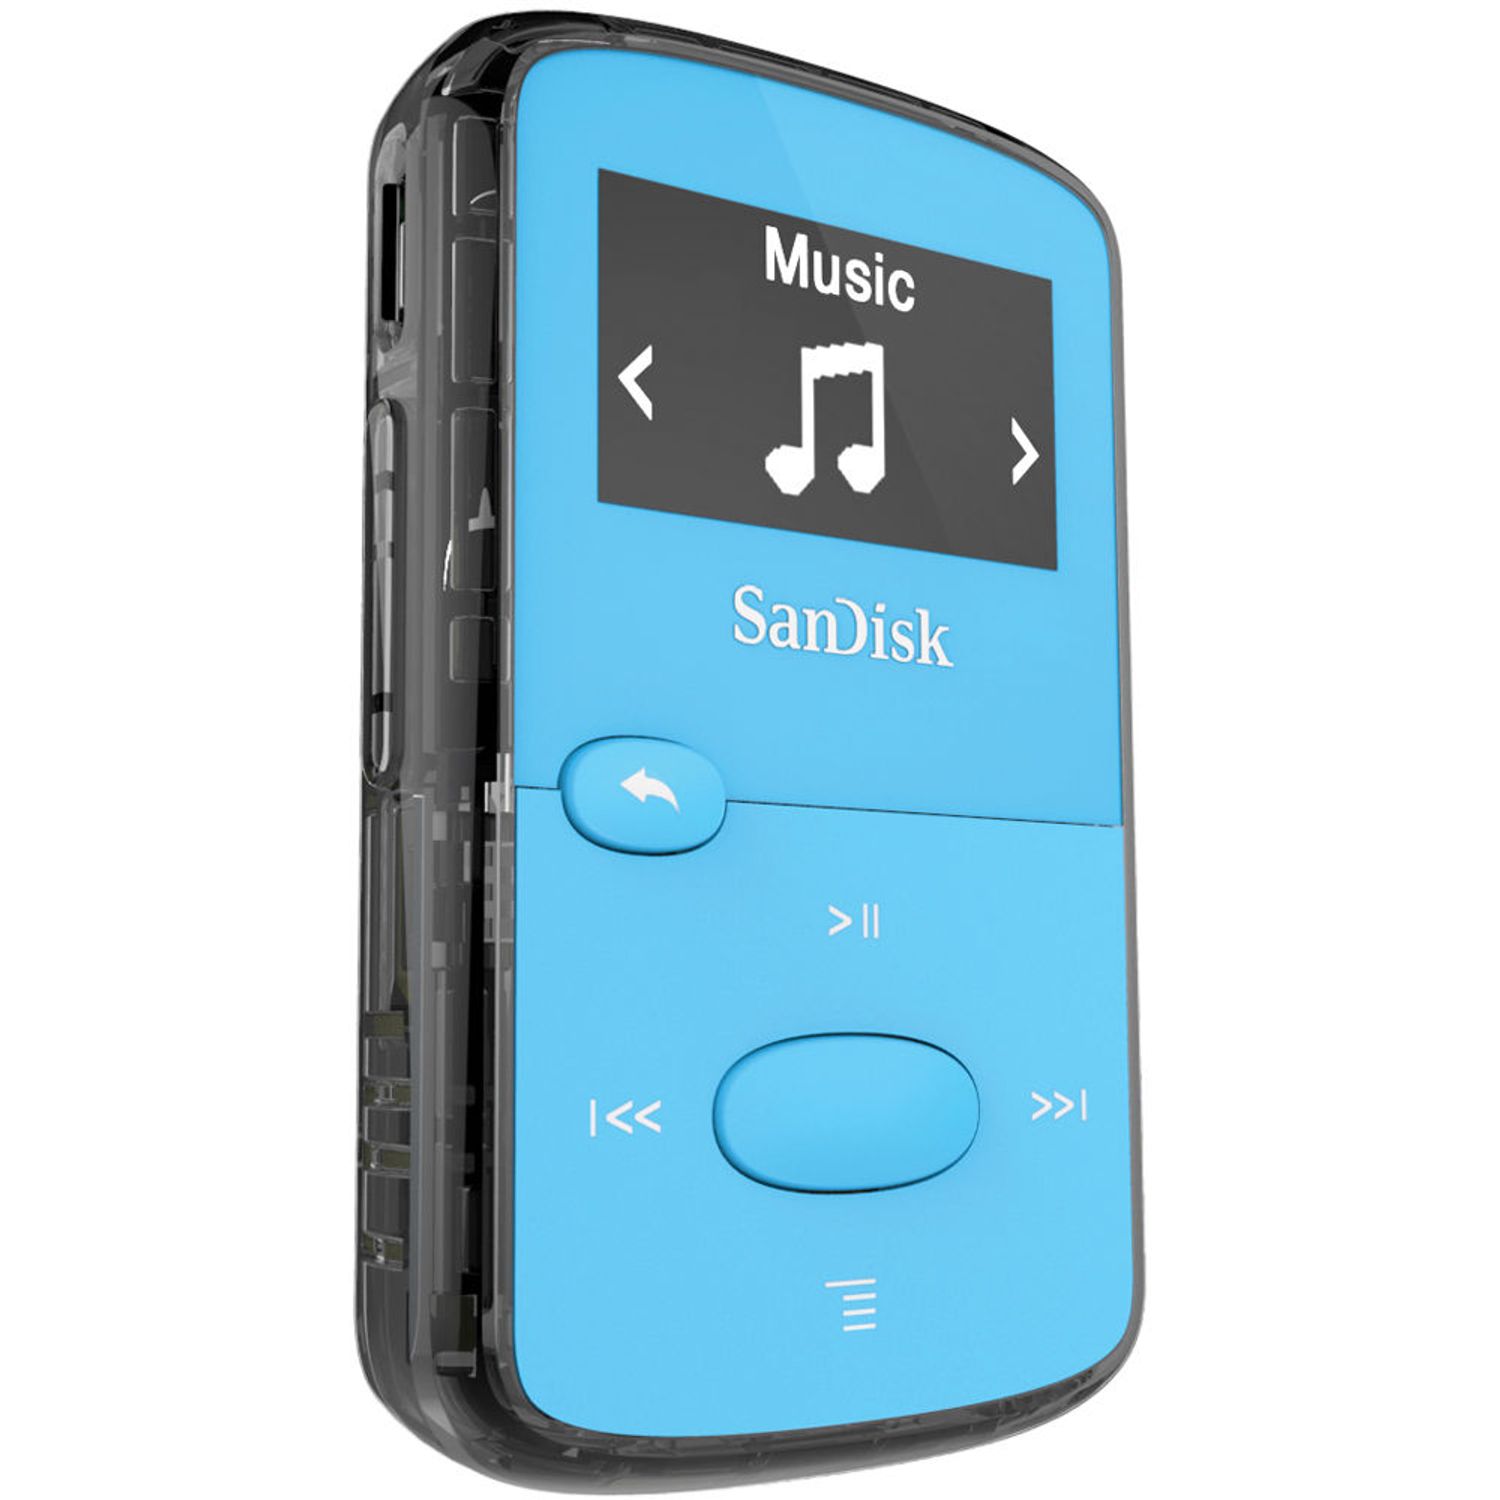 REPRODUCTOR MP3 SD NUEVO COLORES (JTMP3003) – Jtech